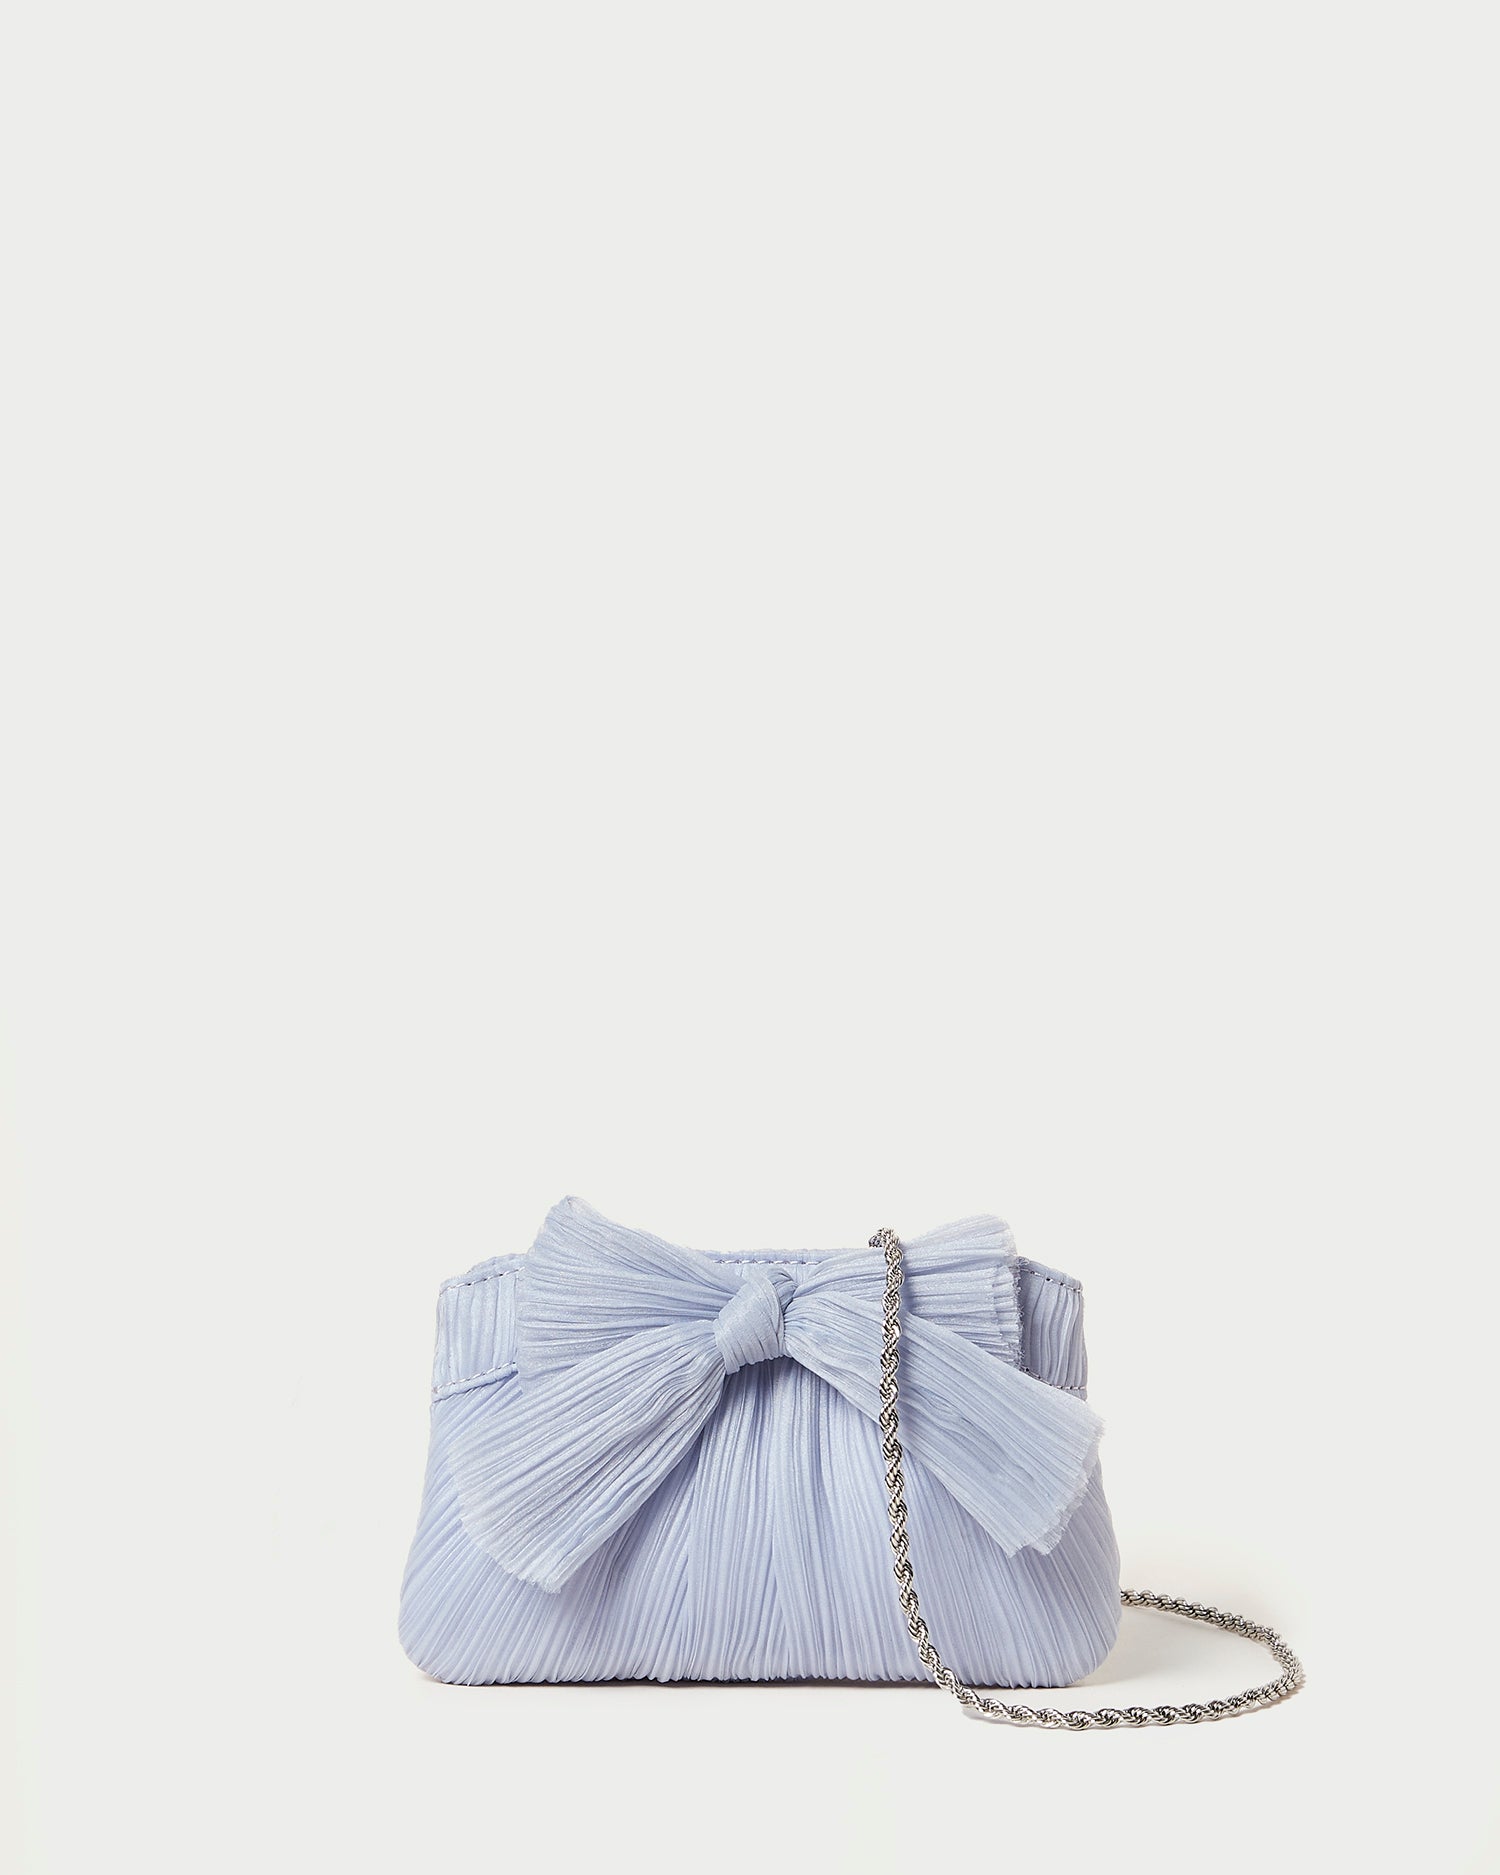 Blue & Beige Bow Bag  Bags, Bow bag, Ostrich leather